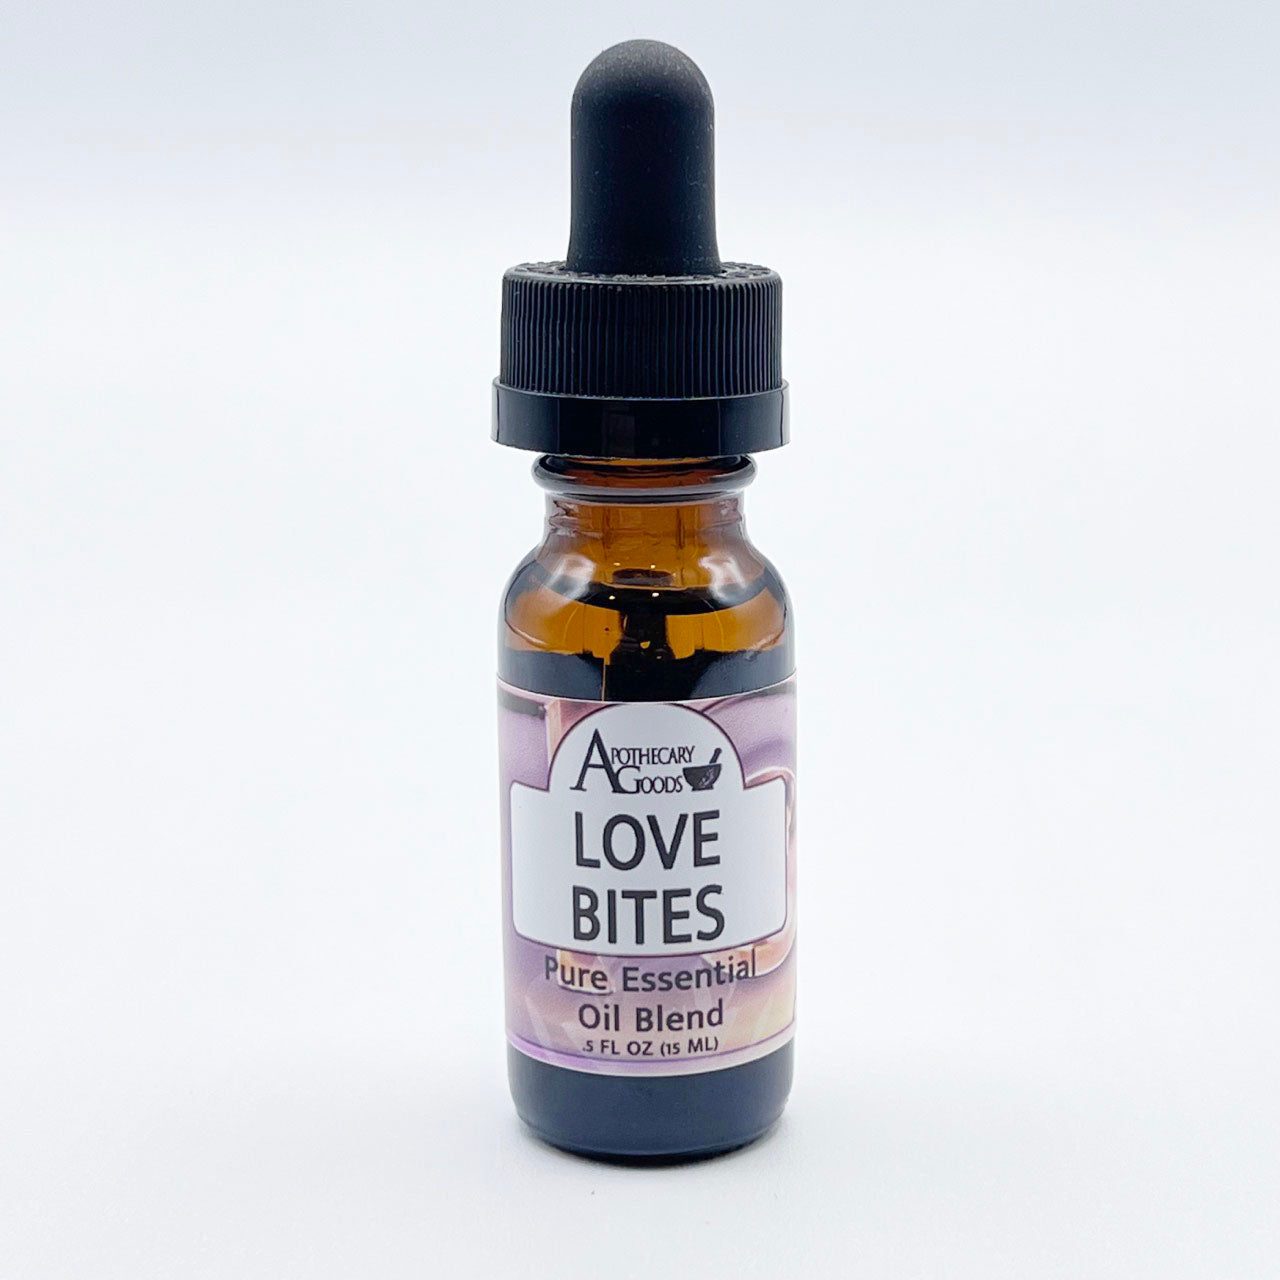 Love Bites Essential Oil Blend: Your Secret Weapon for Self Love and Passion!